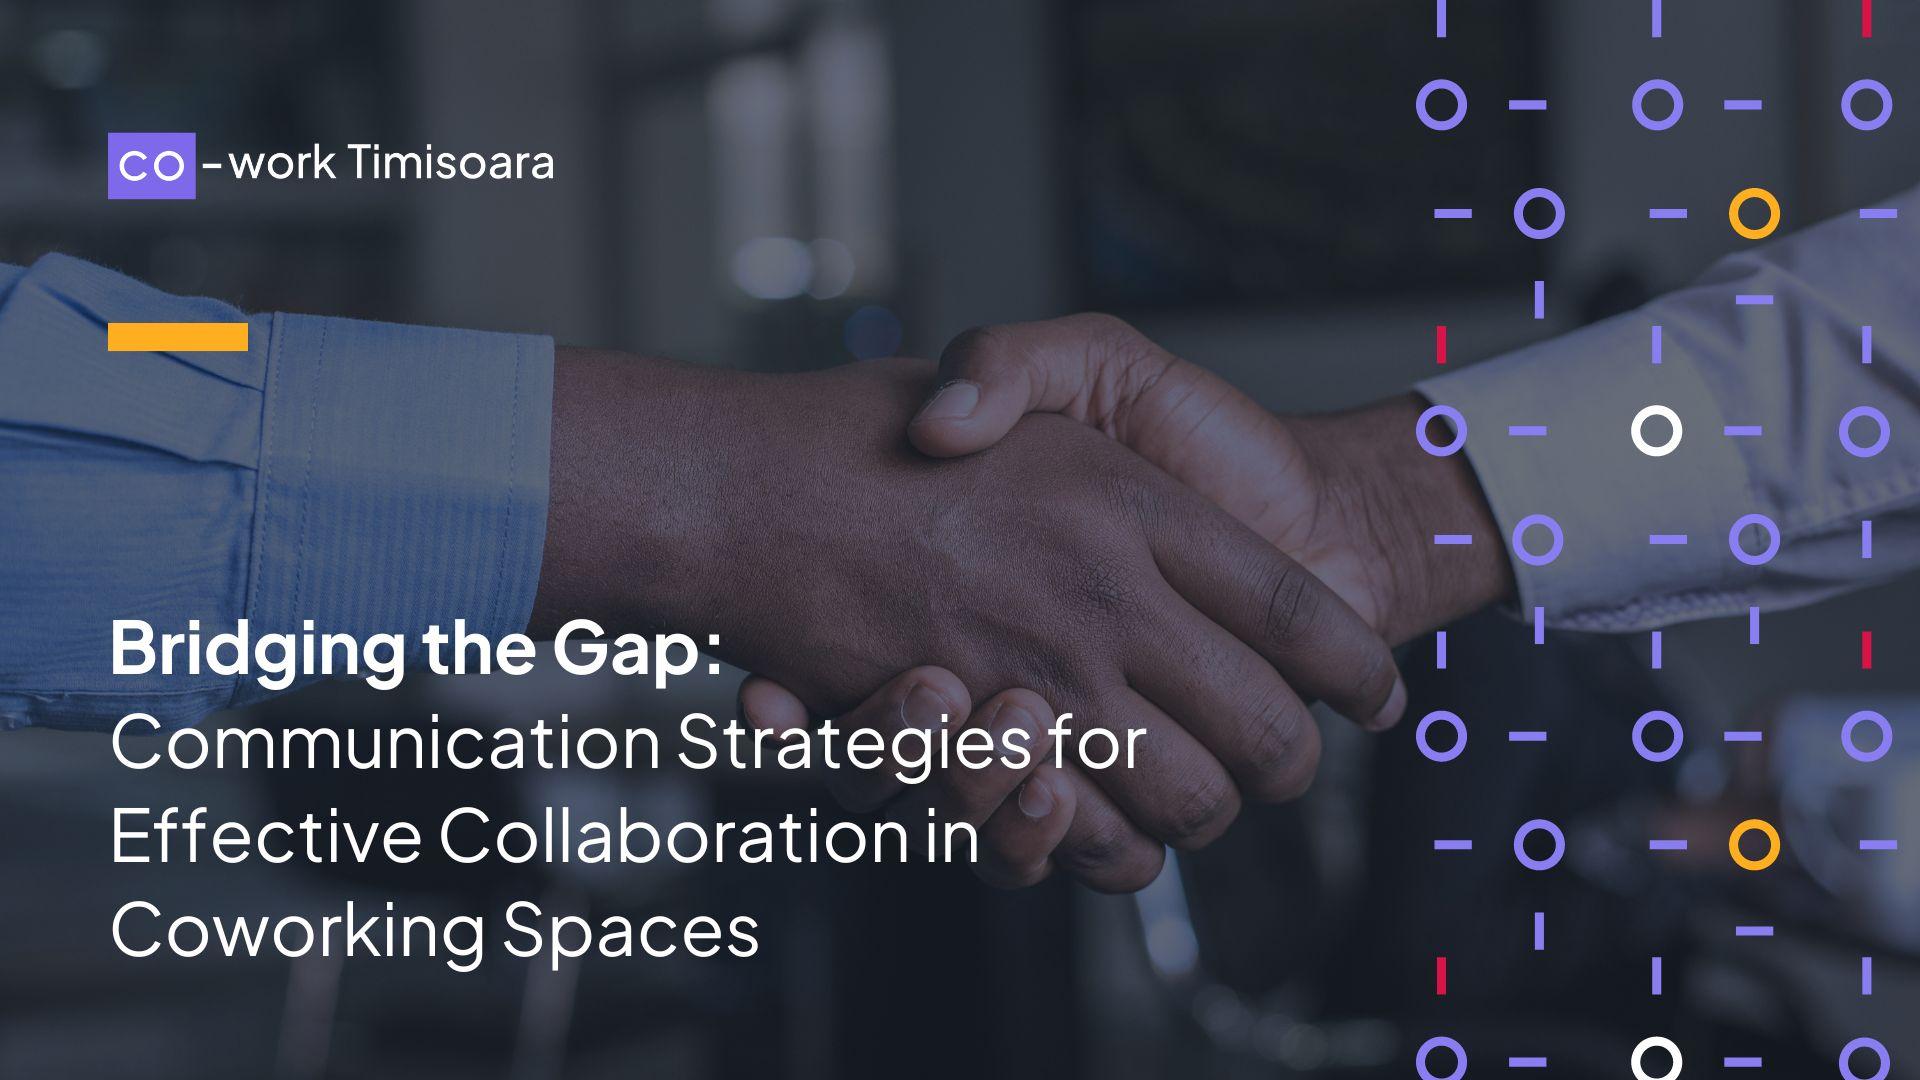 Bridging the Gap: Communication Strategies for Effective Collaboration in Coworking Spaces